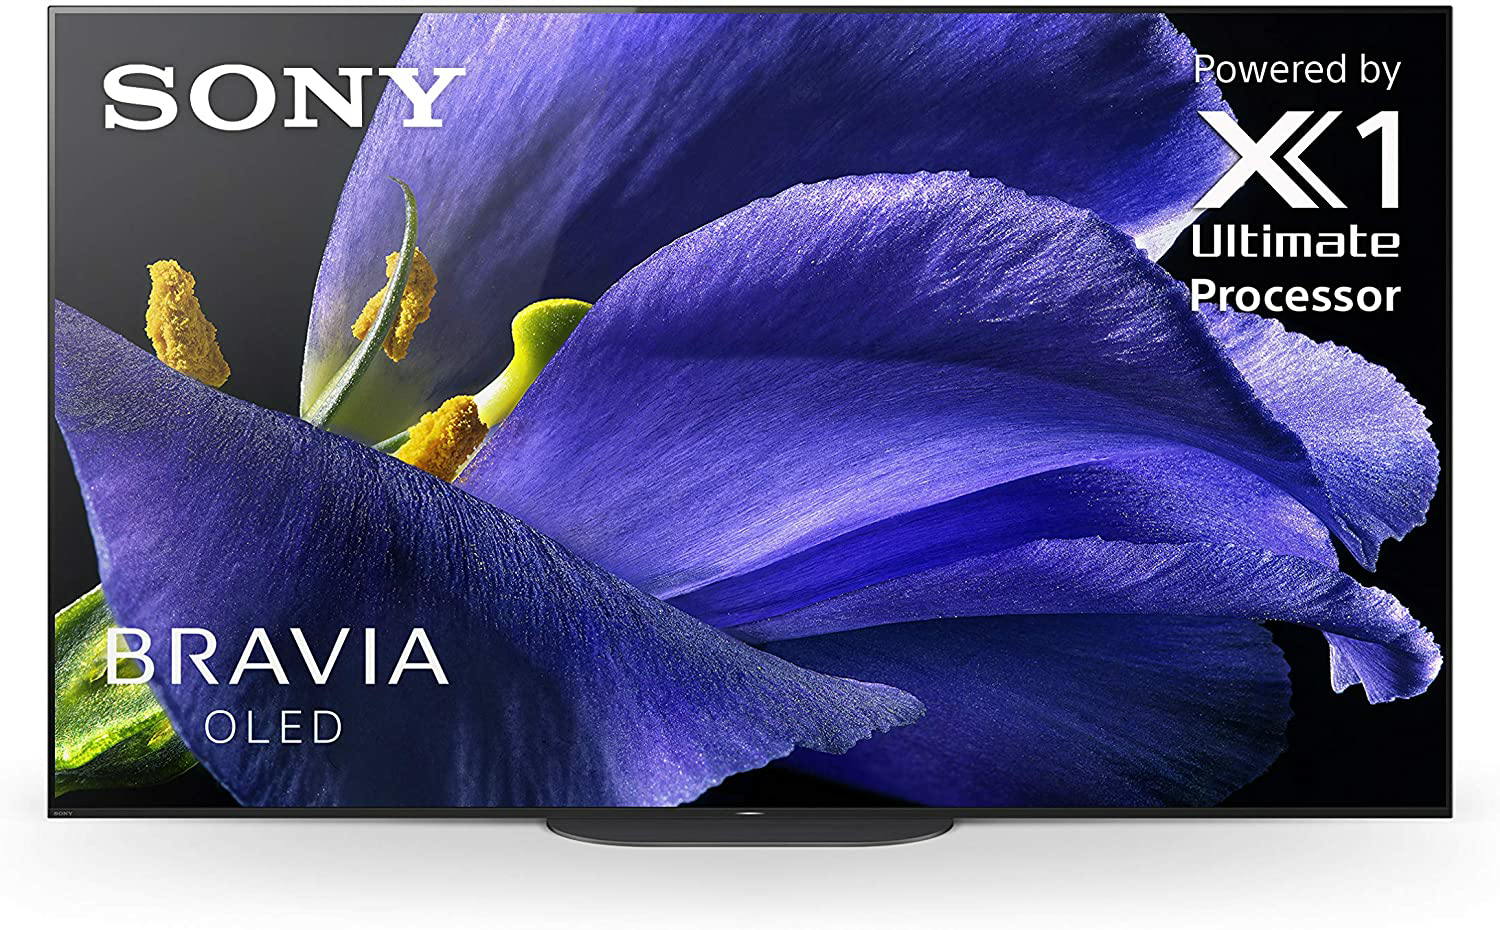 **USED** Amazon.com: Sony XBR-77A9G 77-inch TV: MASTER Series BRAVIA OLED 4K Ultra HD Smart TV with HDR and Alexa Compatibility - 2019 Model: Electronics $2500